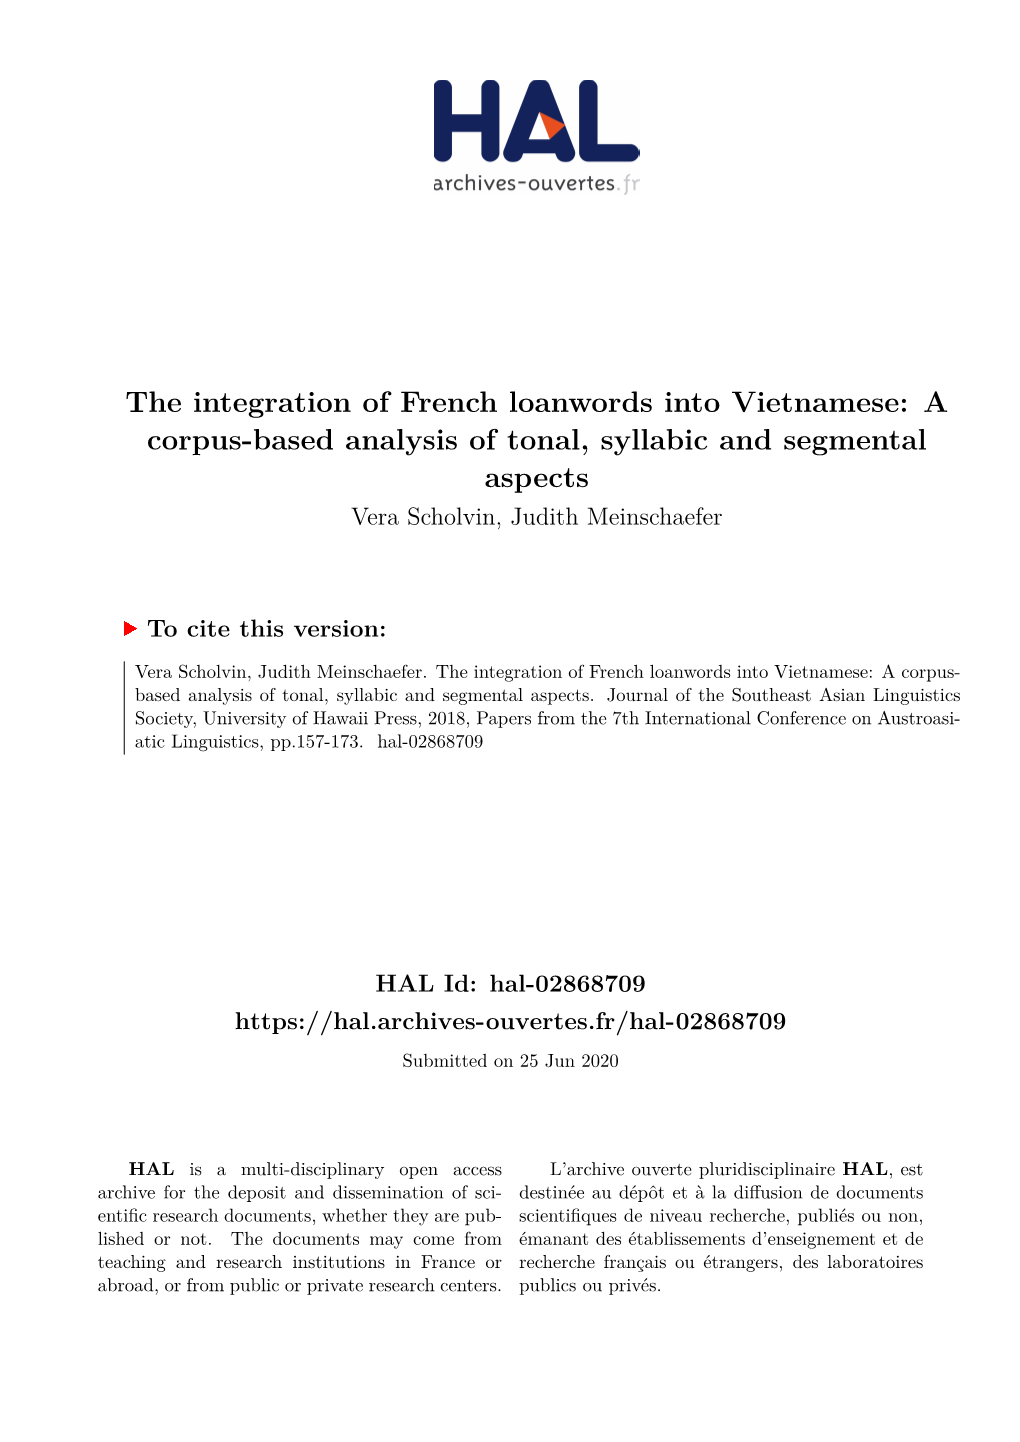 The Integration of French Loanwords Into Vietnamese: a Corpus-Based Analysis of Tonal, Syllabic and Segmental Aspects Vera Scholvin, Judith Meinschaefer